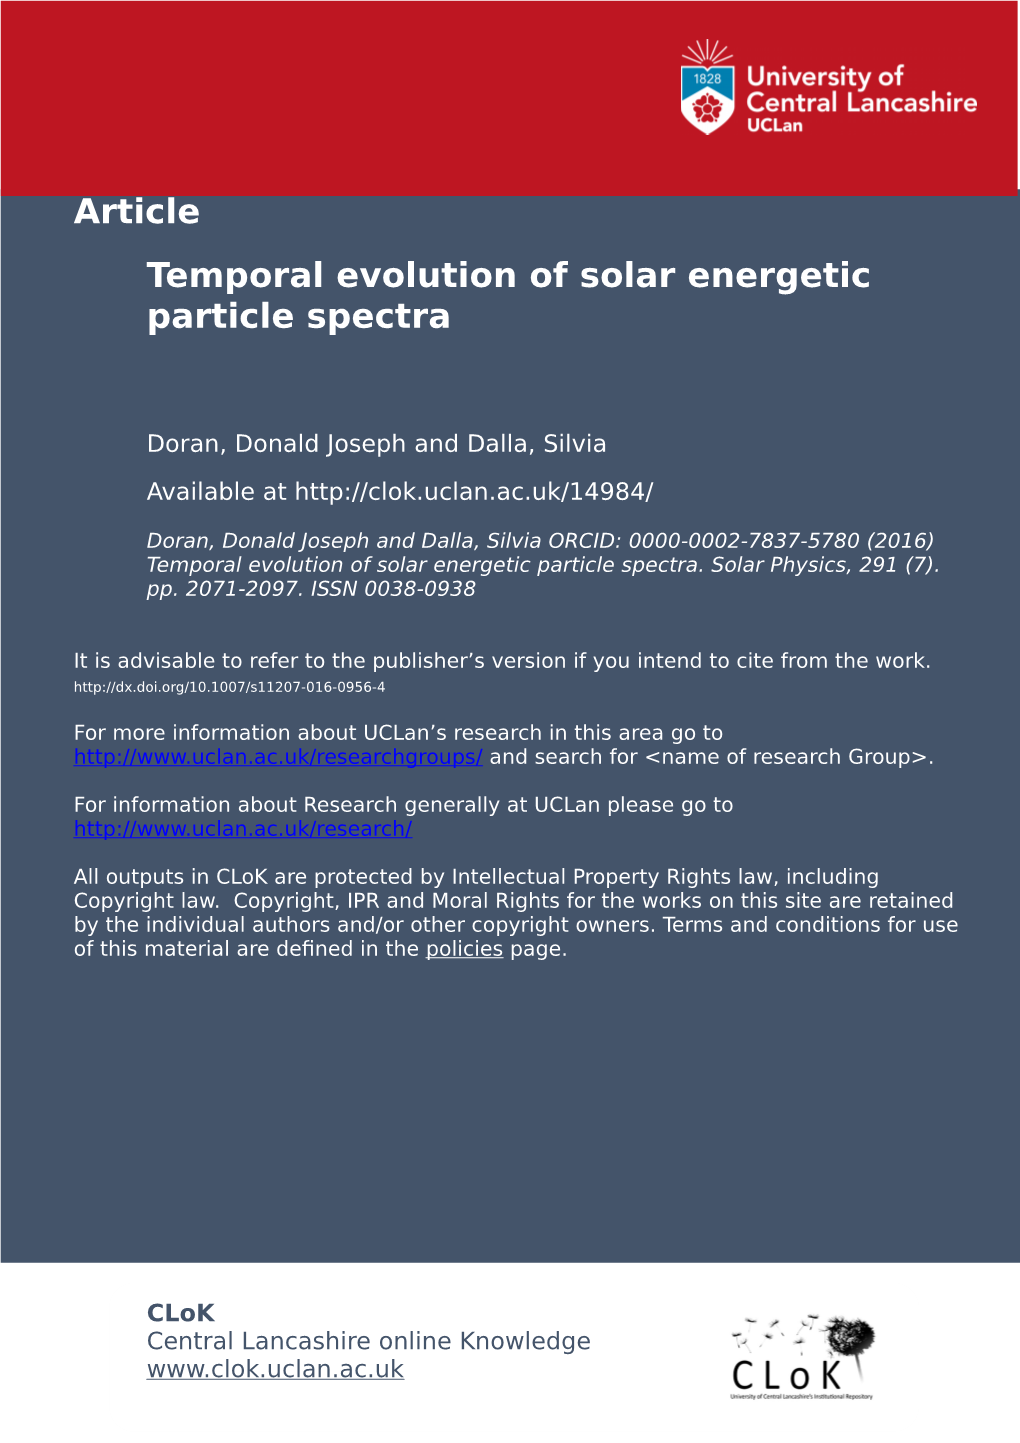 Temporal Evolution of Solar Energetic Particle Spectra